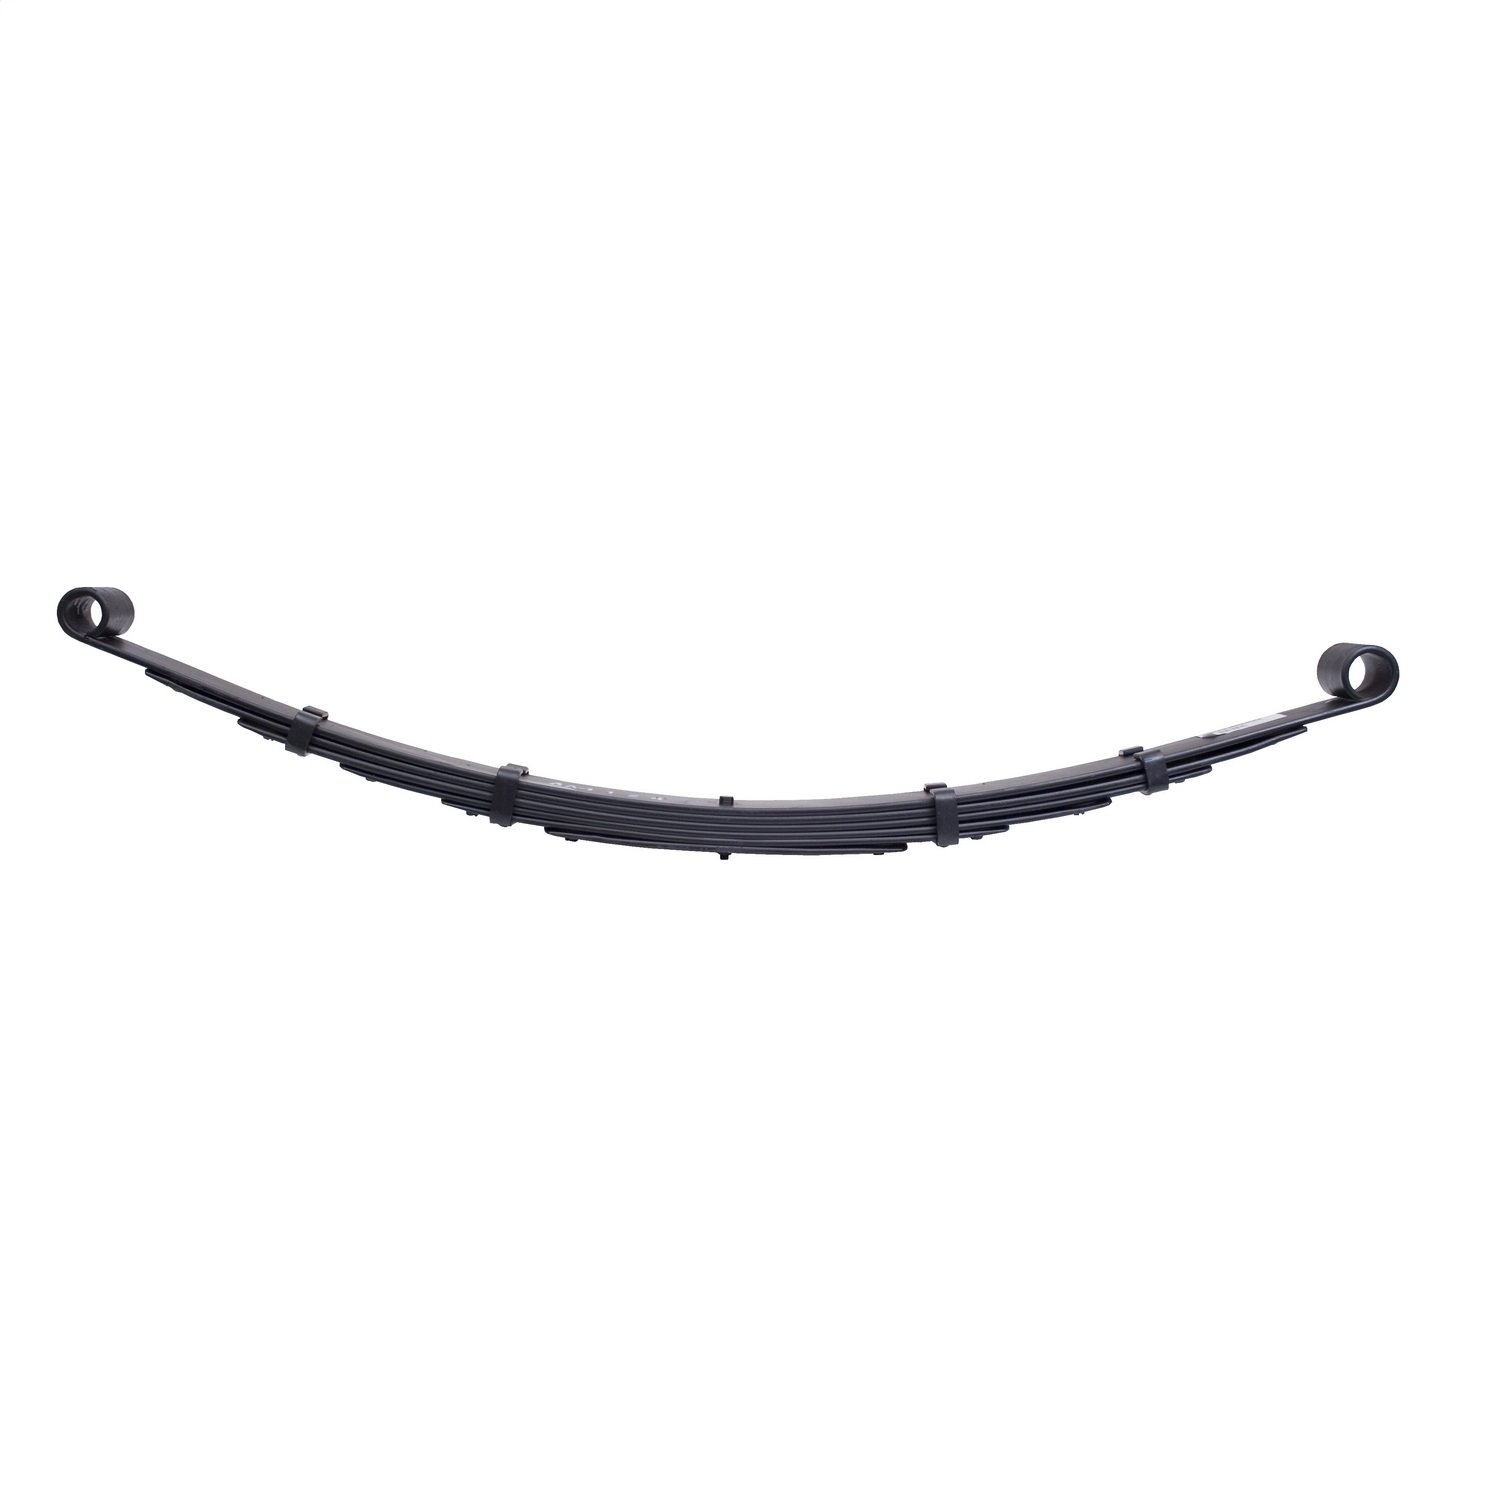 Replacement rear leaf spring from Omix-ADA has 6 leaves. It, Fits87-95 Jeep Wrangler YJ